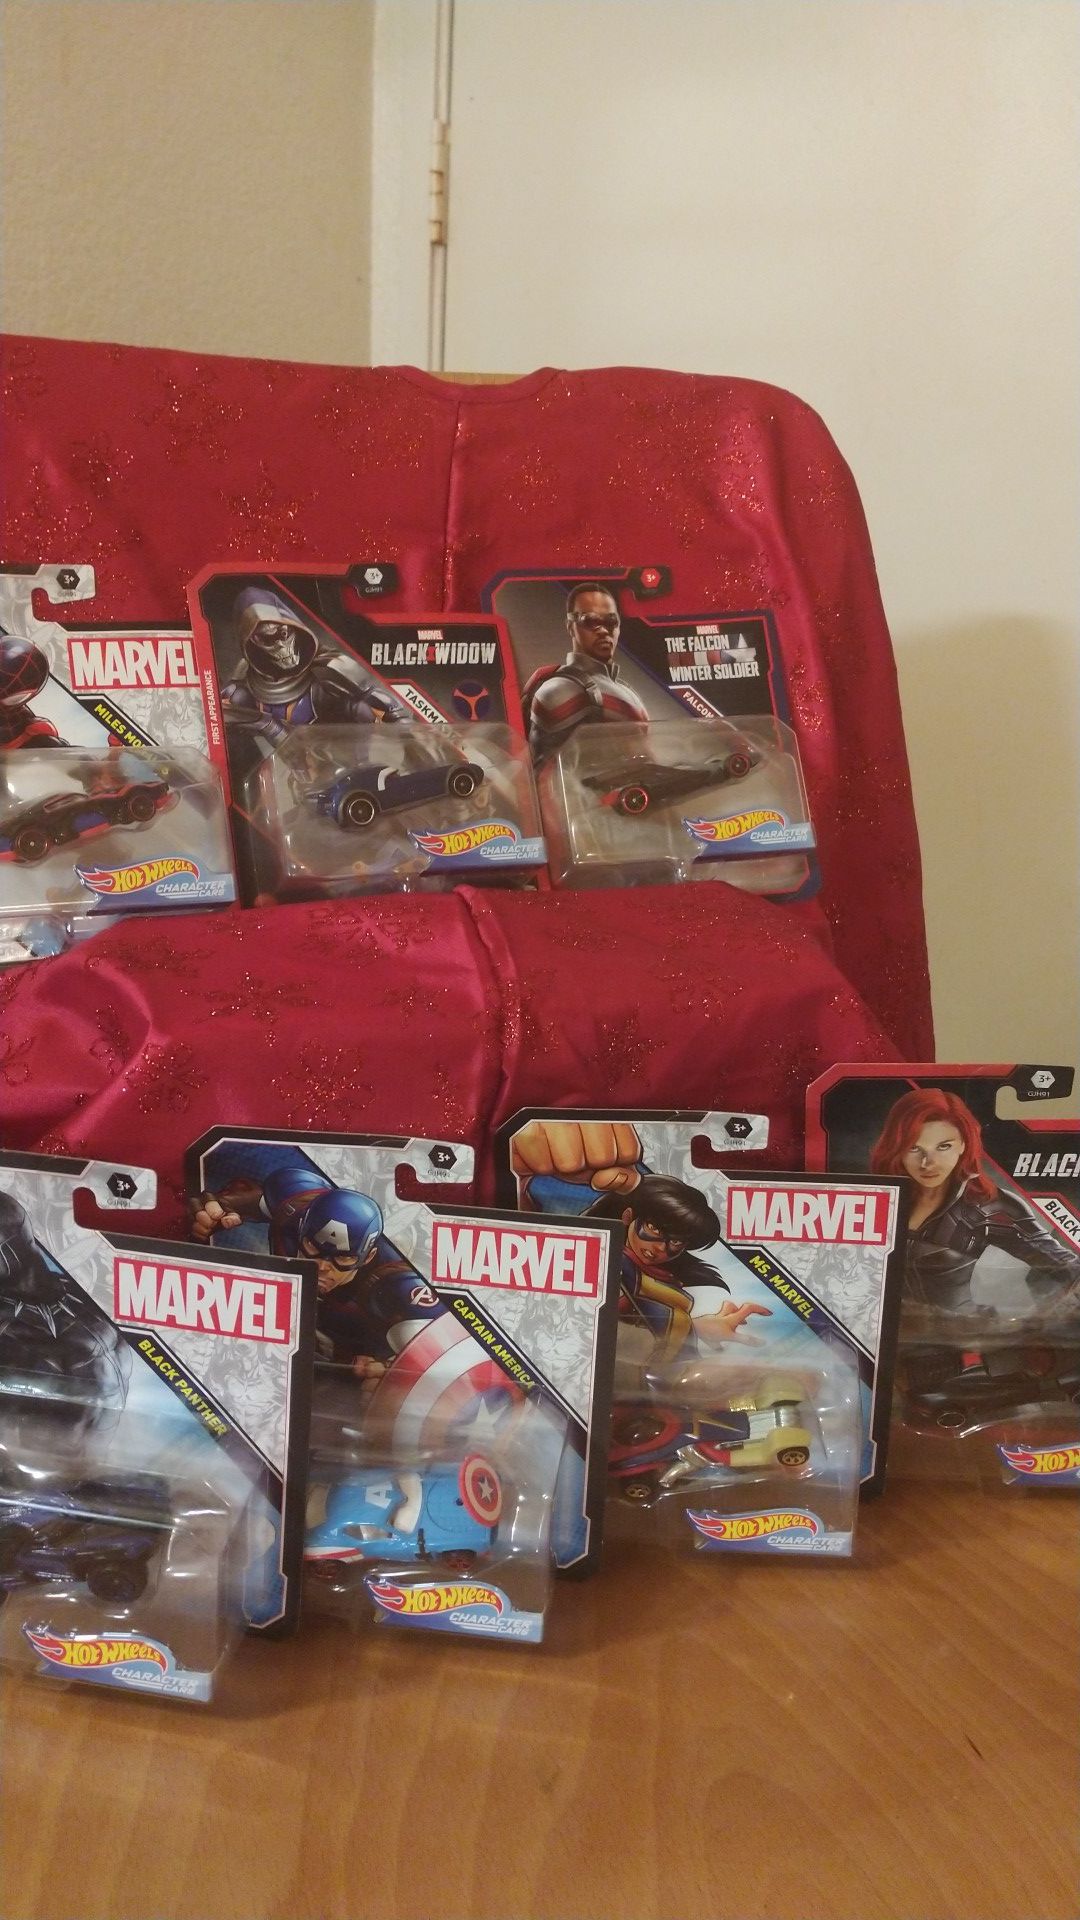 Marvel action figures all 7